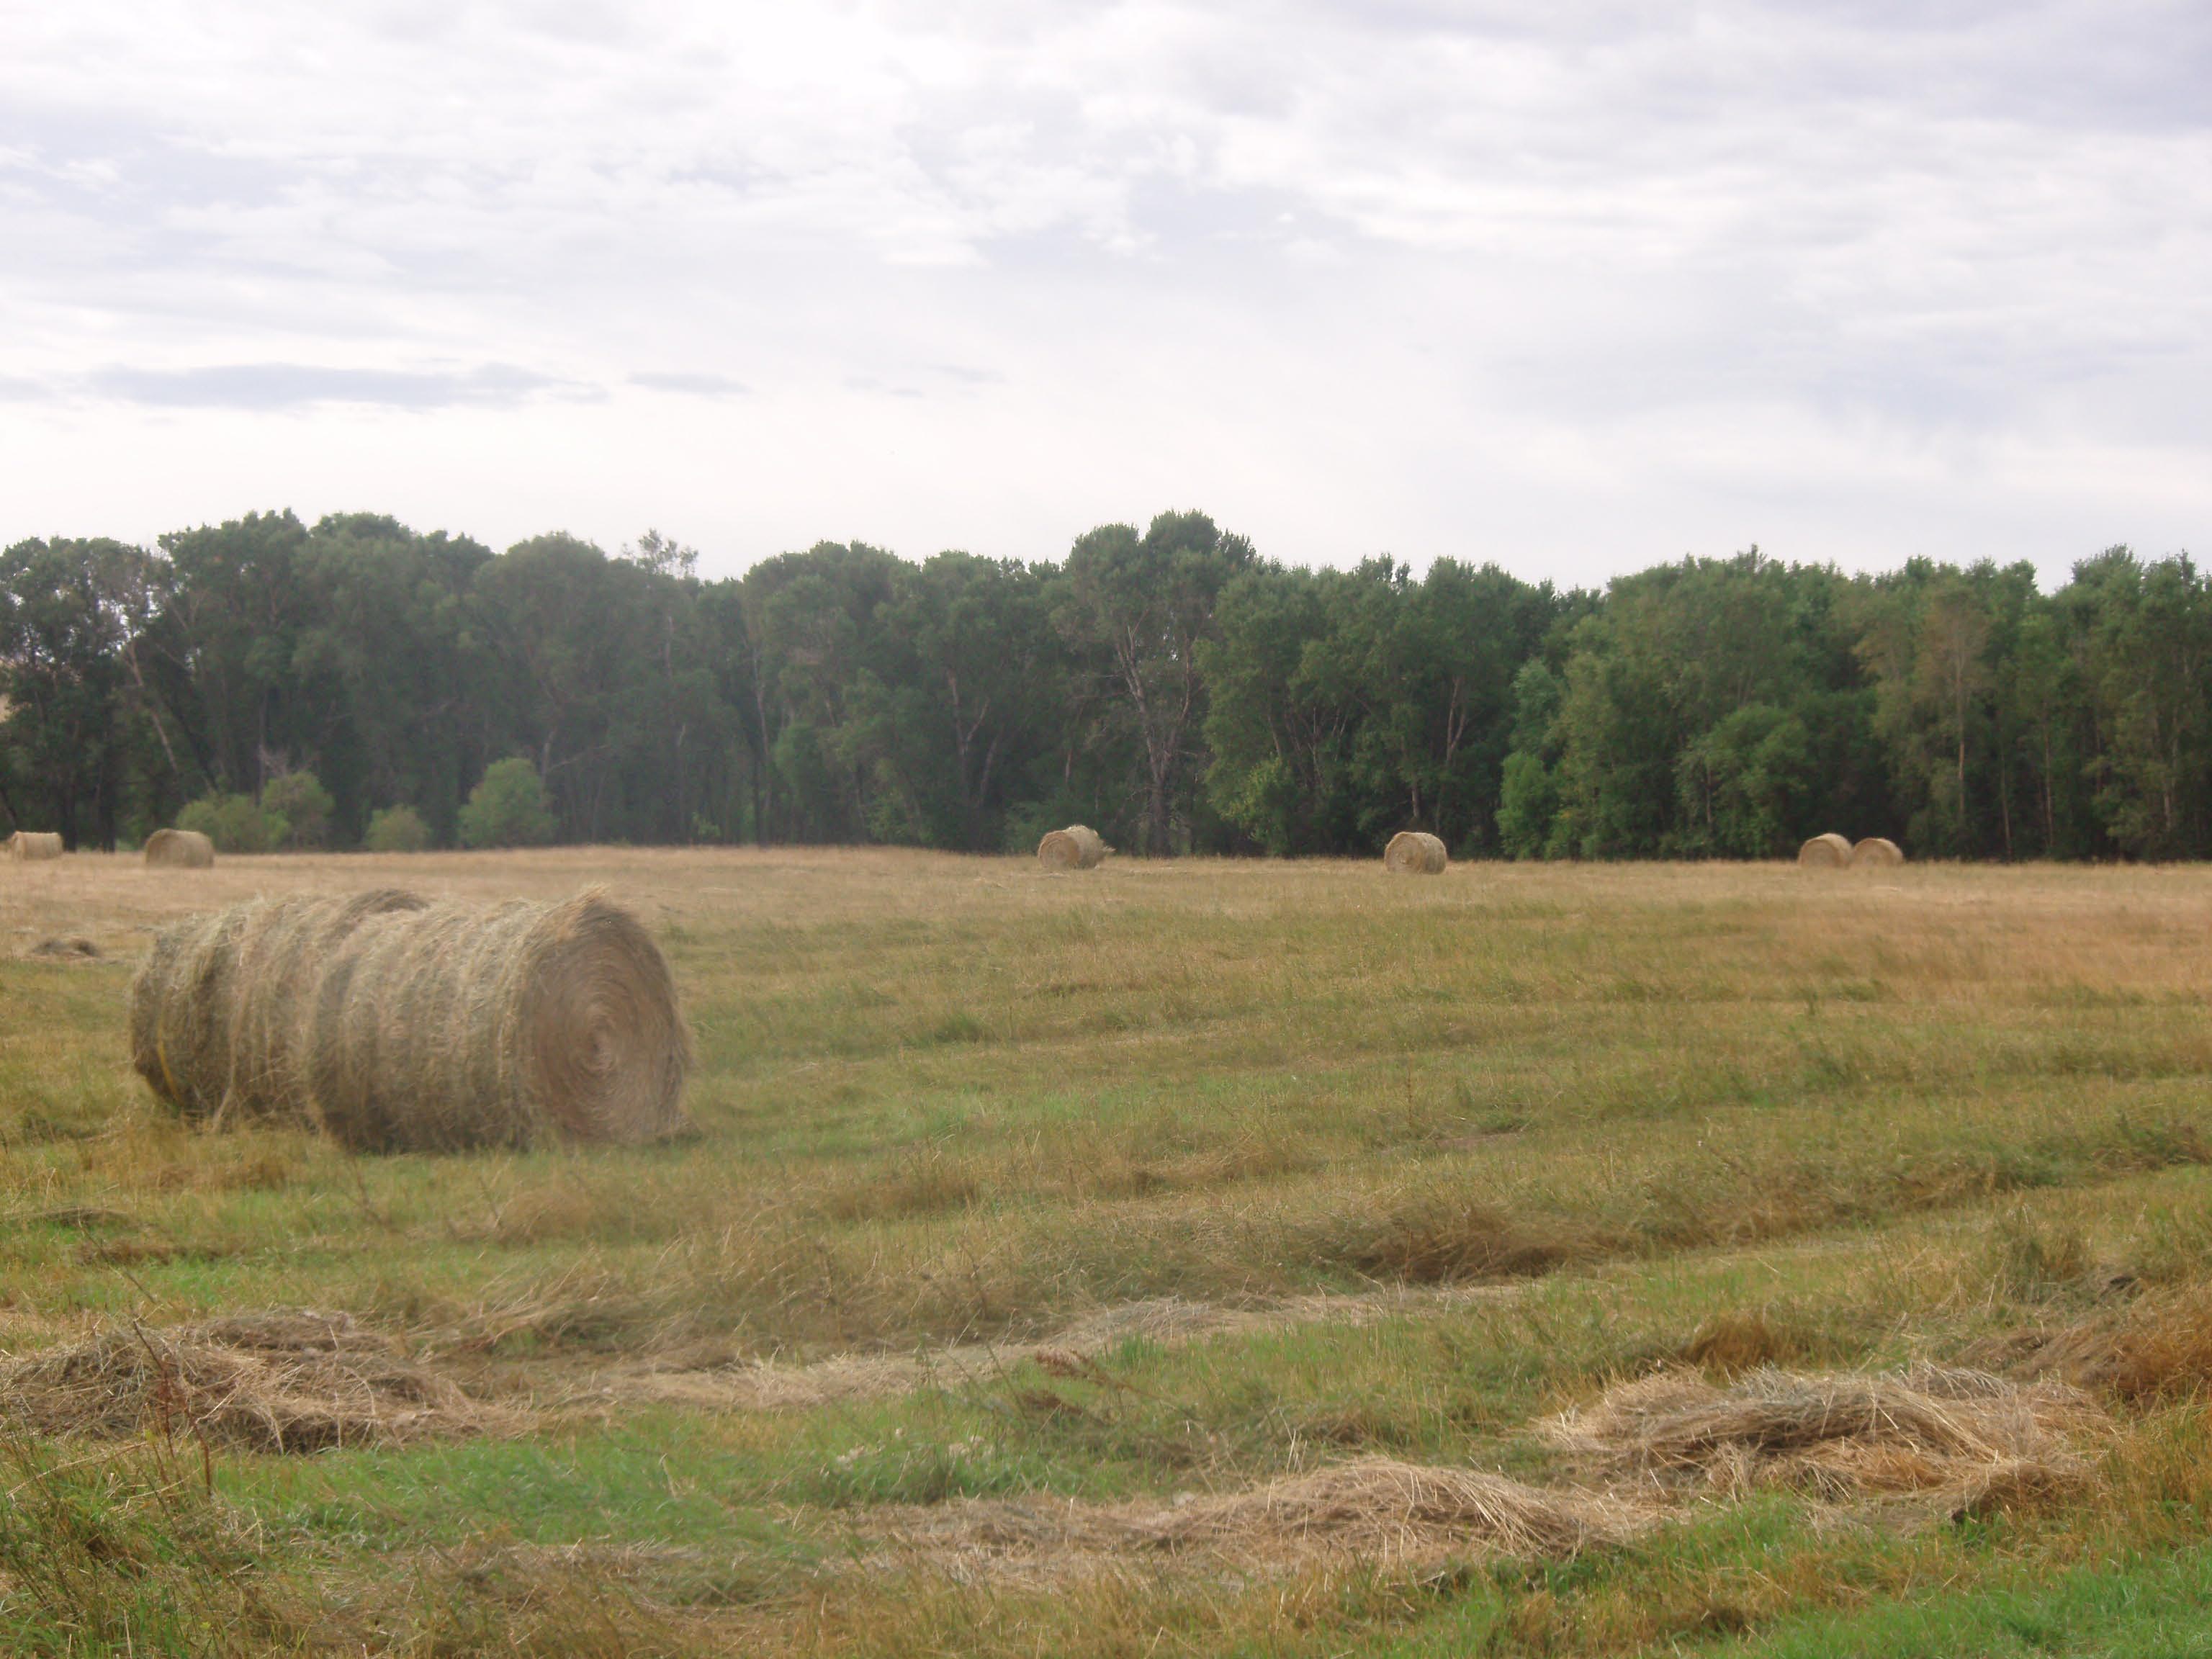 Avoid Nitrate Toxicity by Waiting to Cut Hay After Recent Rains